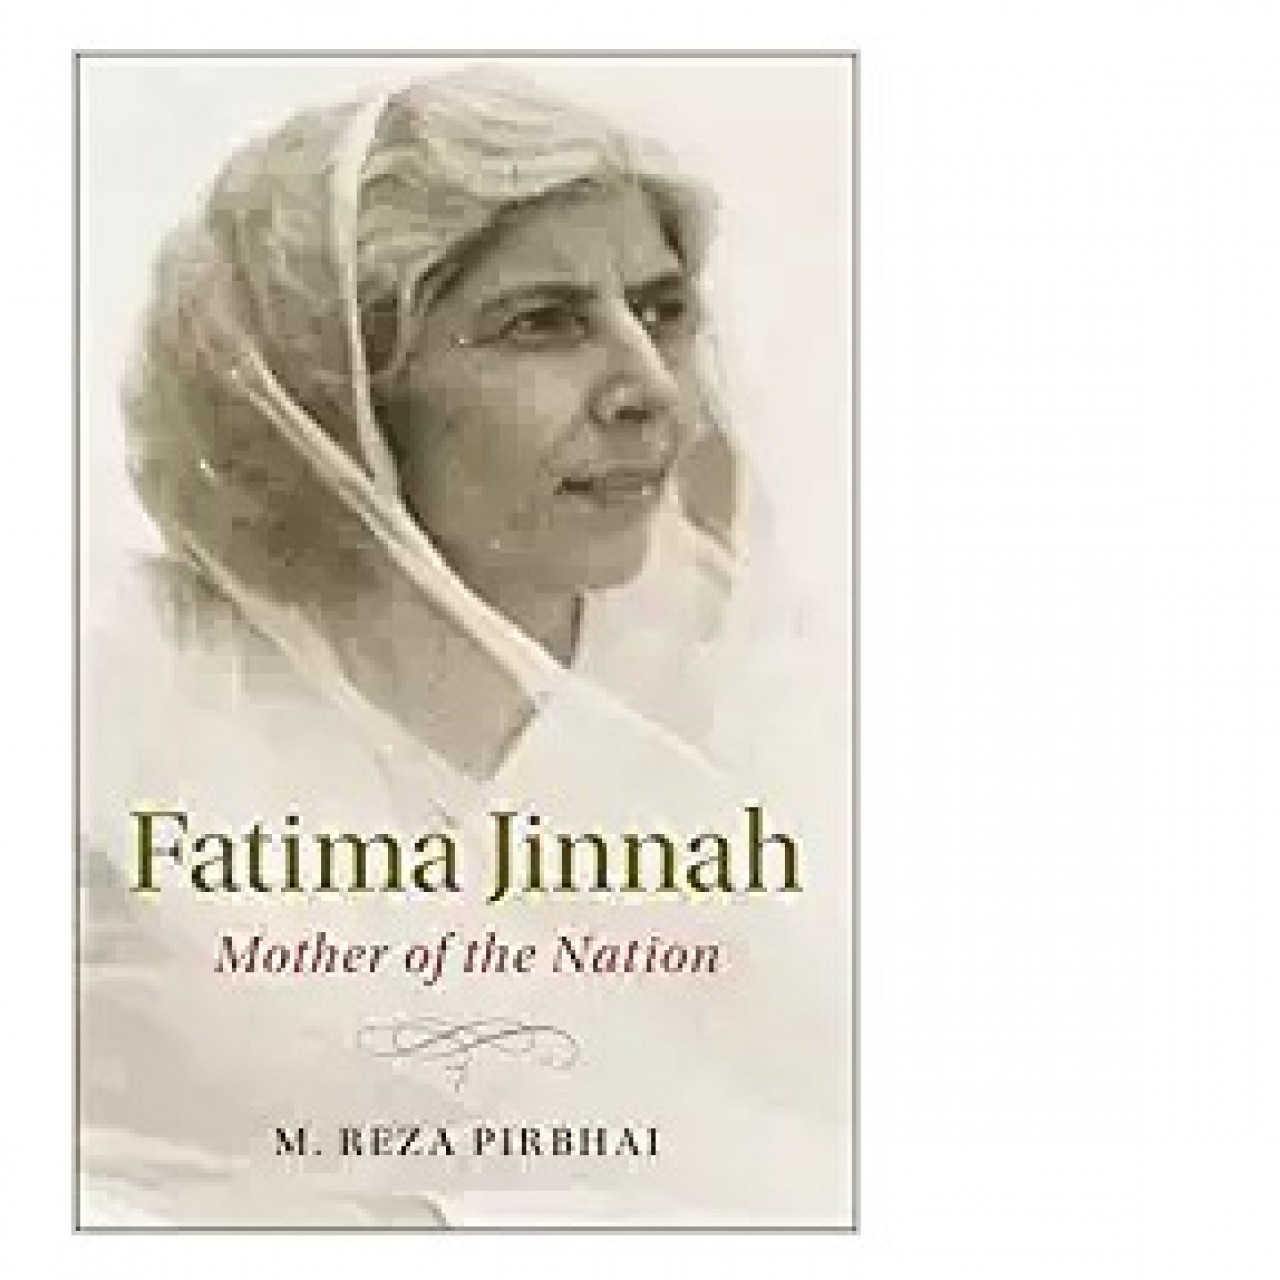 Fatima Jinnah: Mother Of The Nation by M. Reza Pirbhai